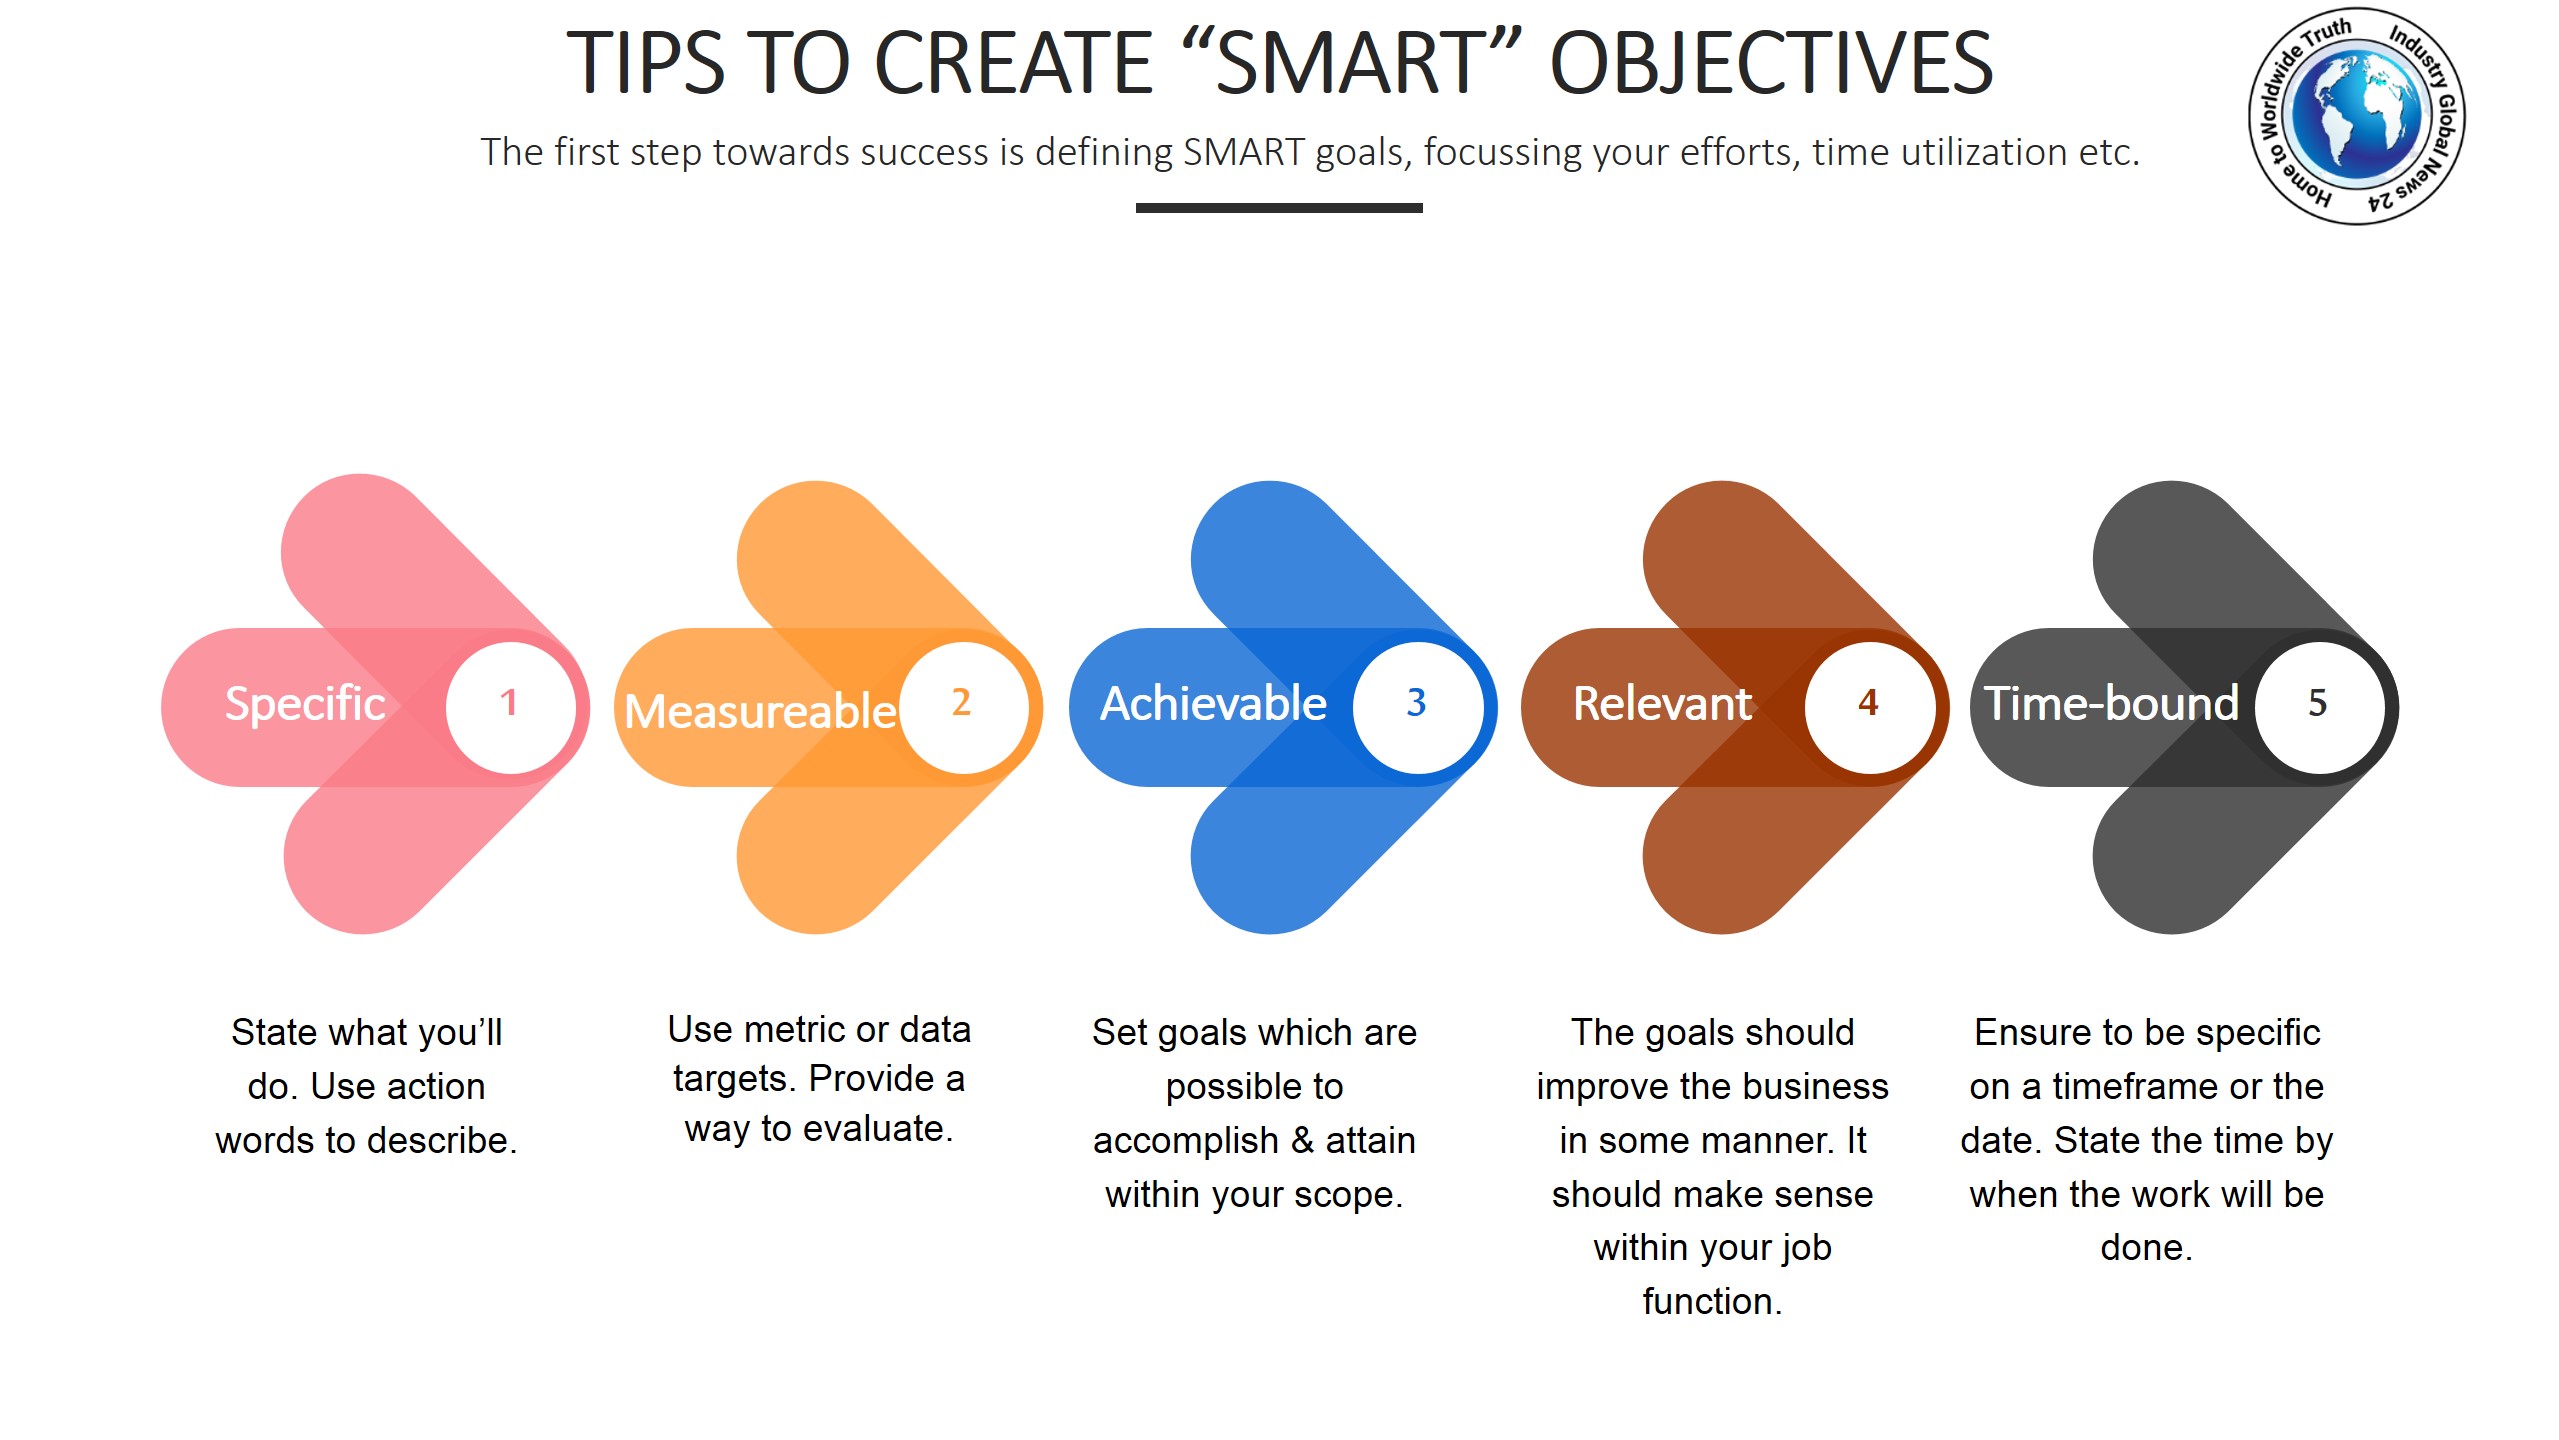 Tips to create “SMART” objectives